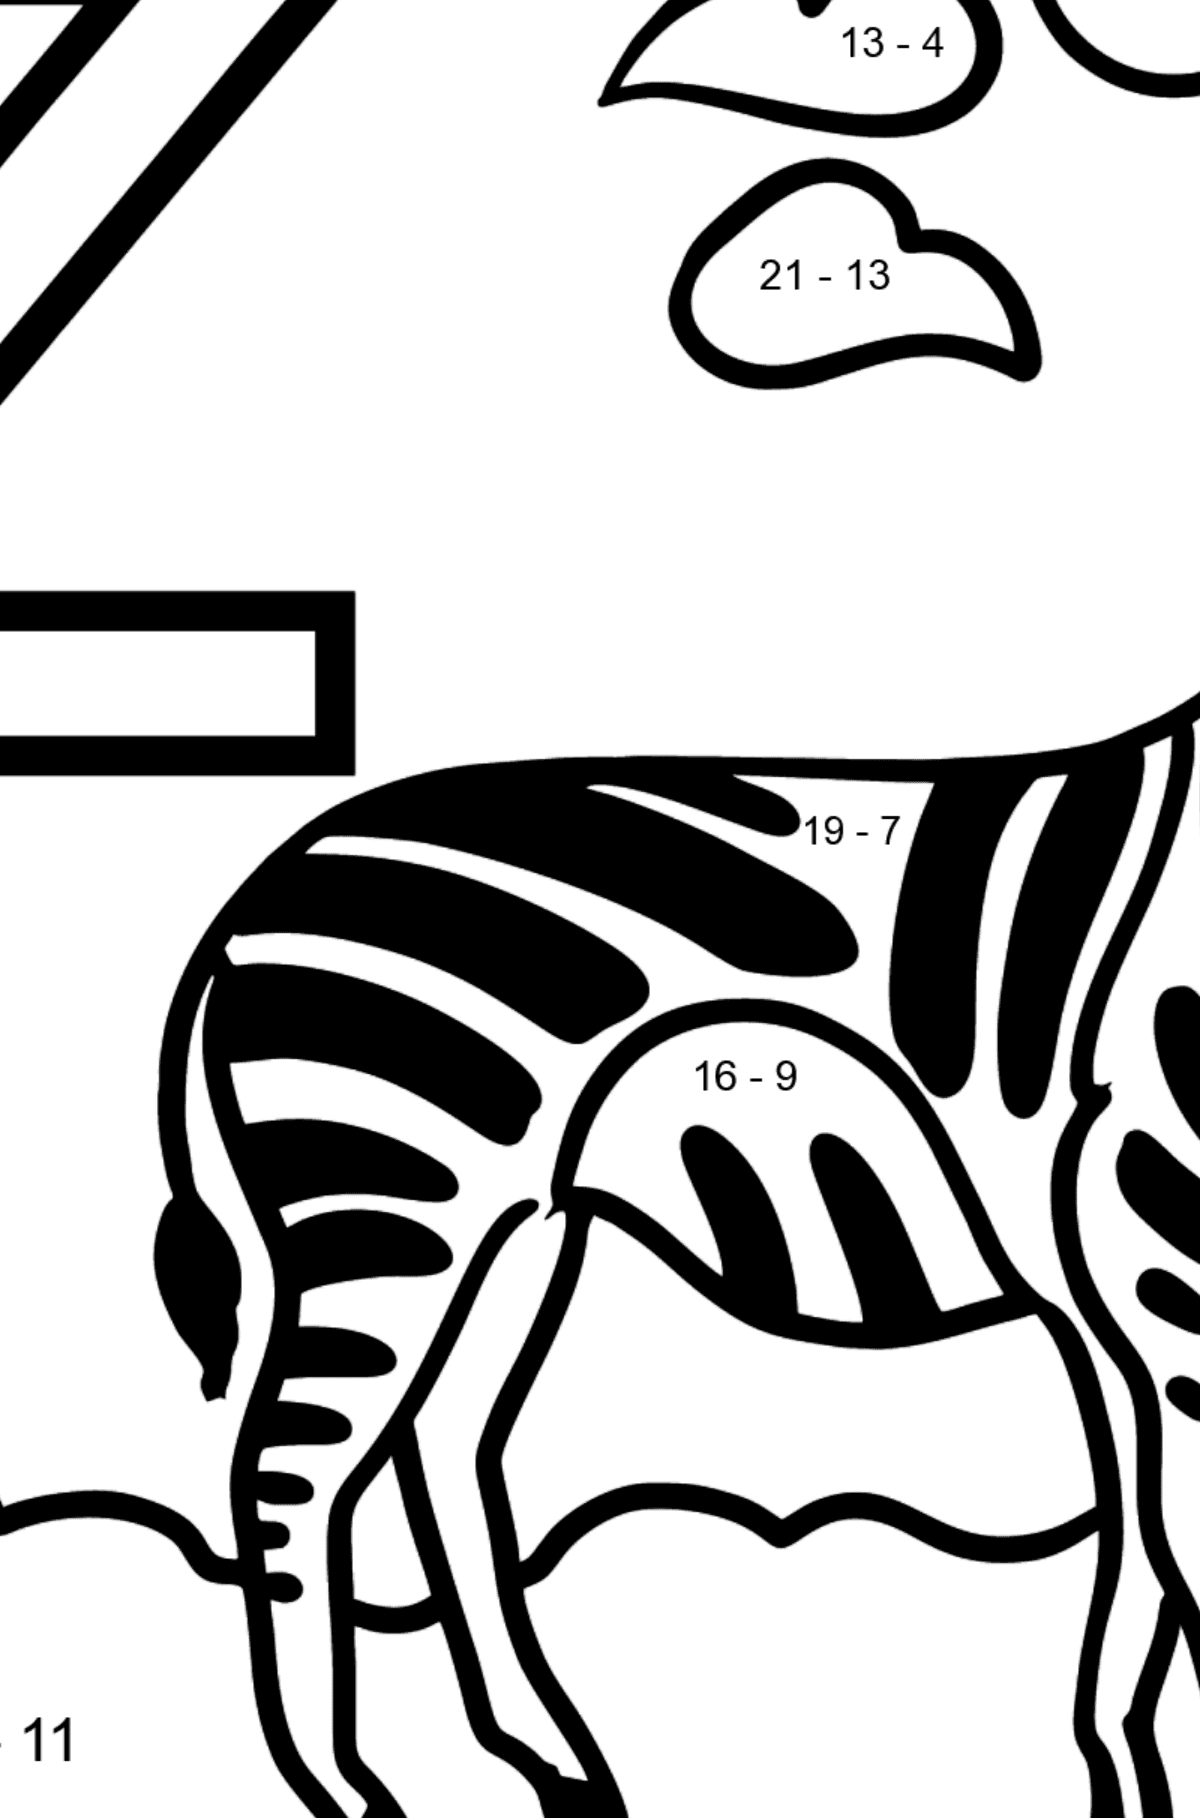 English Letter Z coloring pages - ZEBRA - Math Coloring - Subtraction for Kids